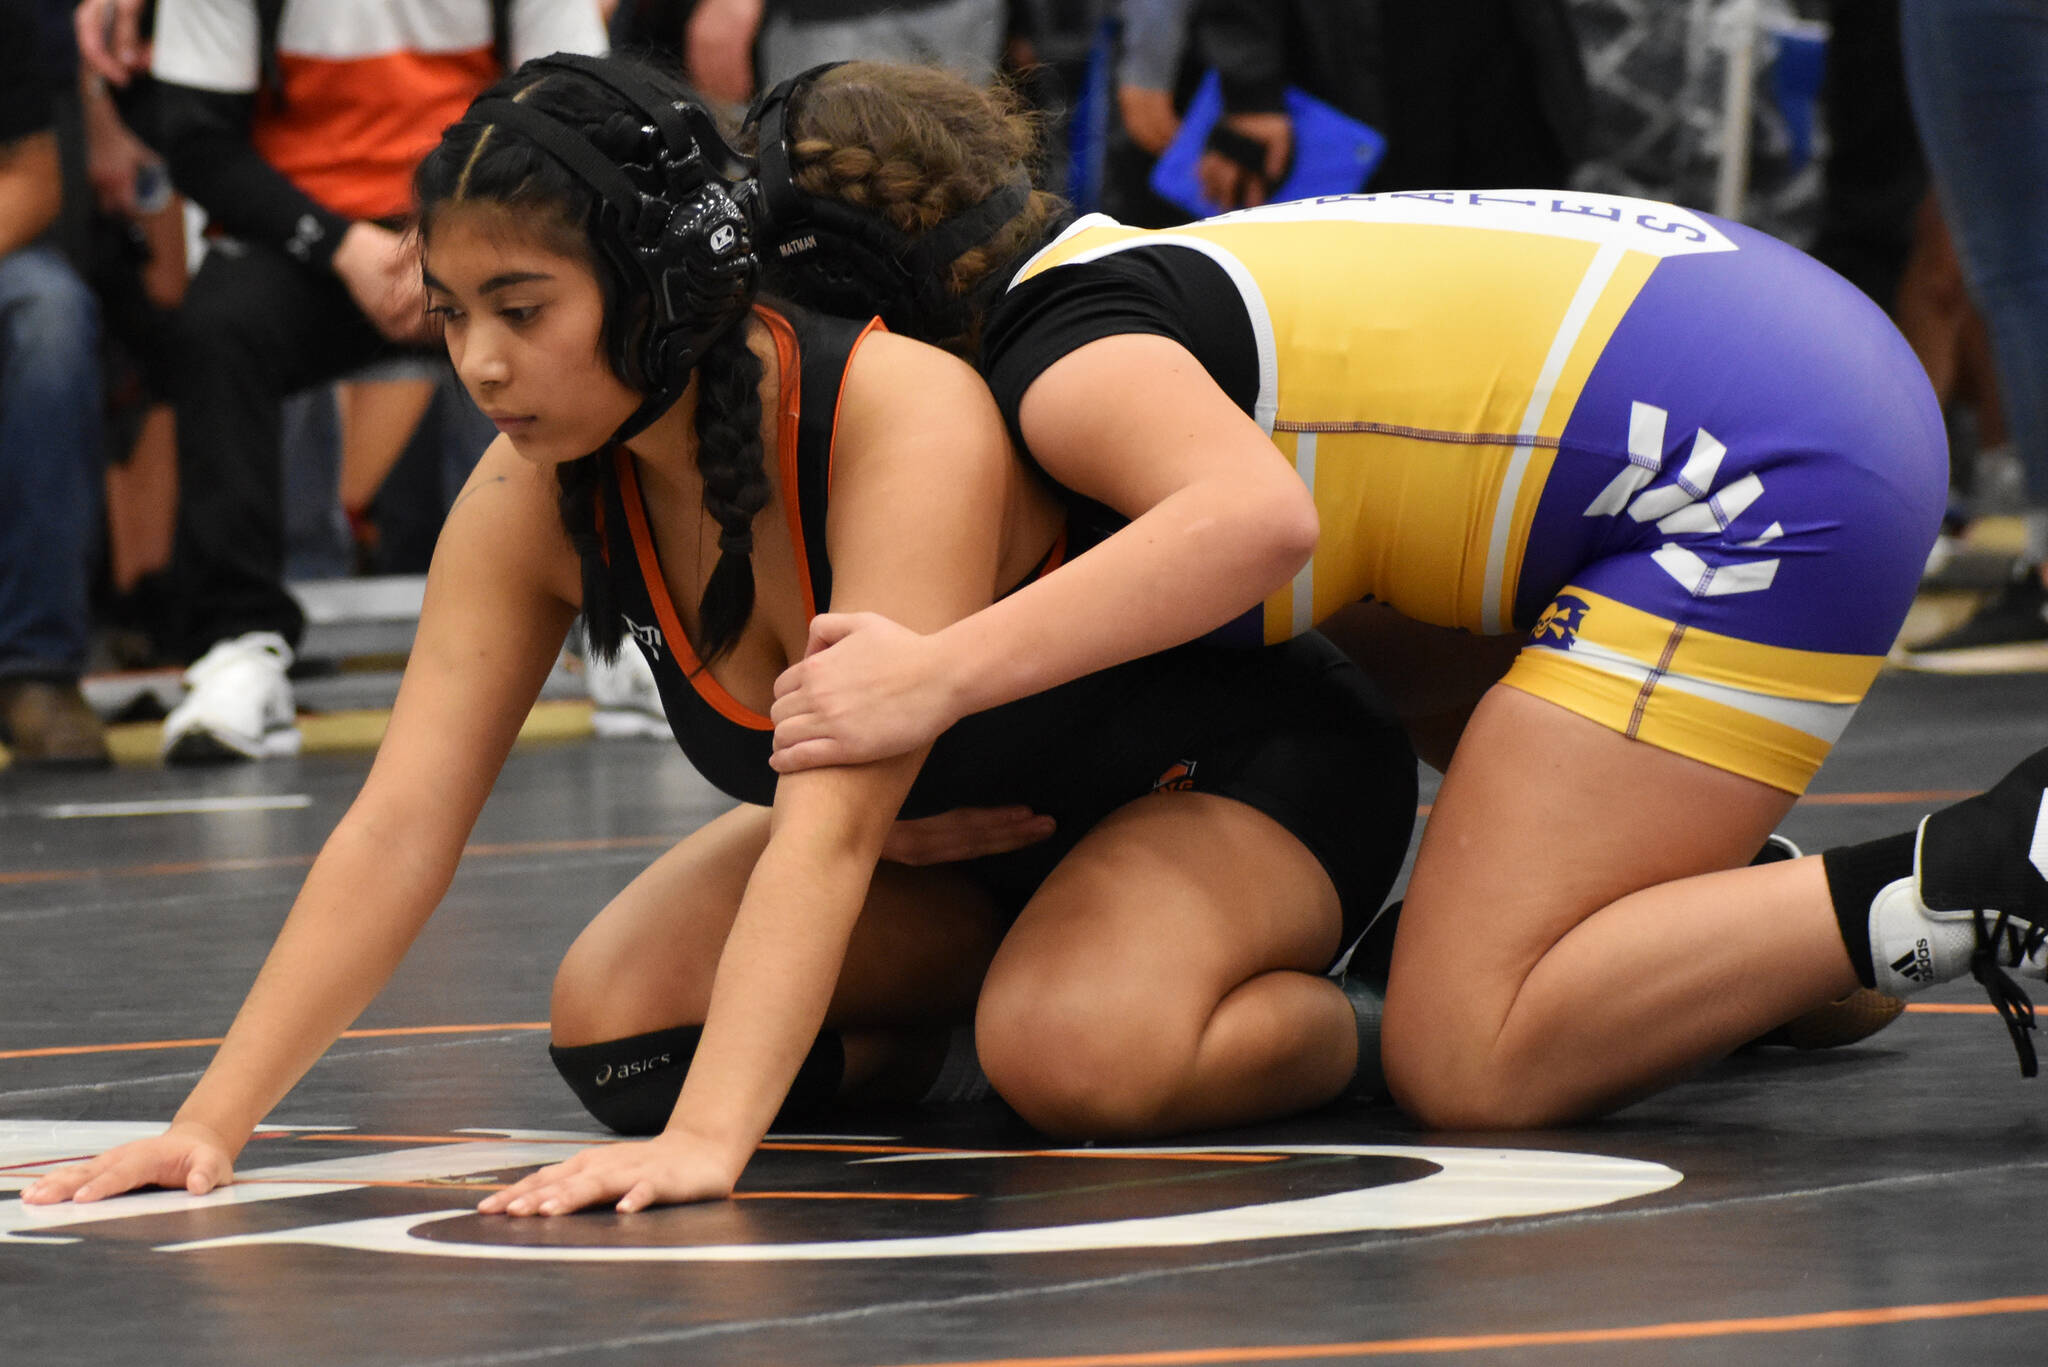 Several wrestling teams will be competing across Western Washington before taking part in the Mat Classic at the Tacoma Dome.